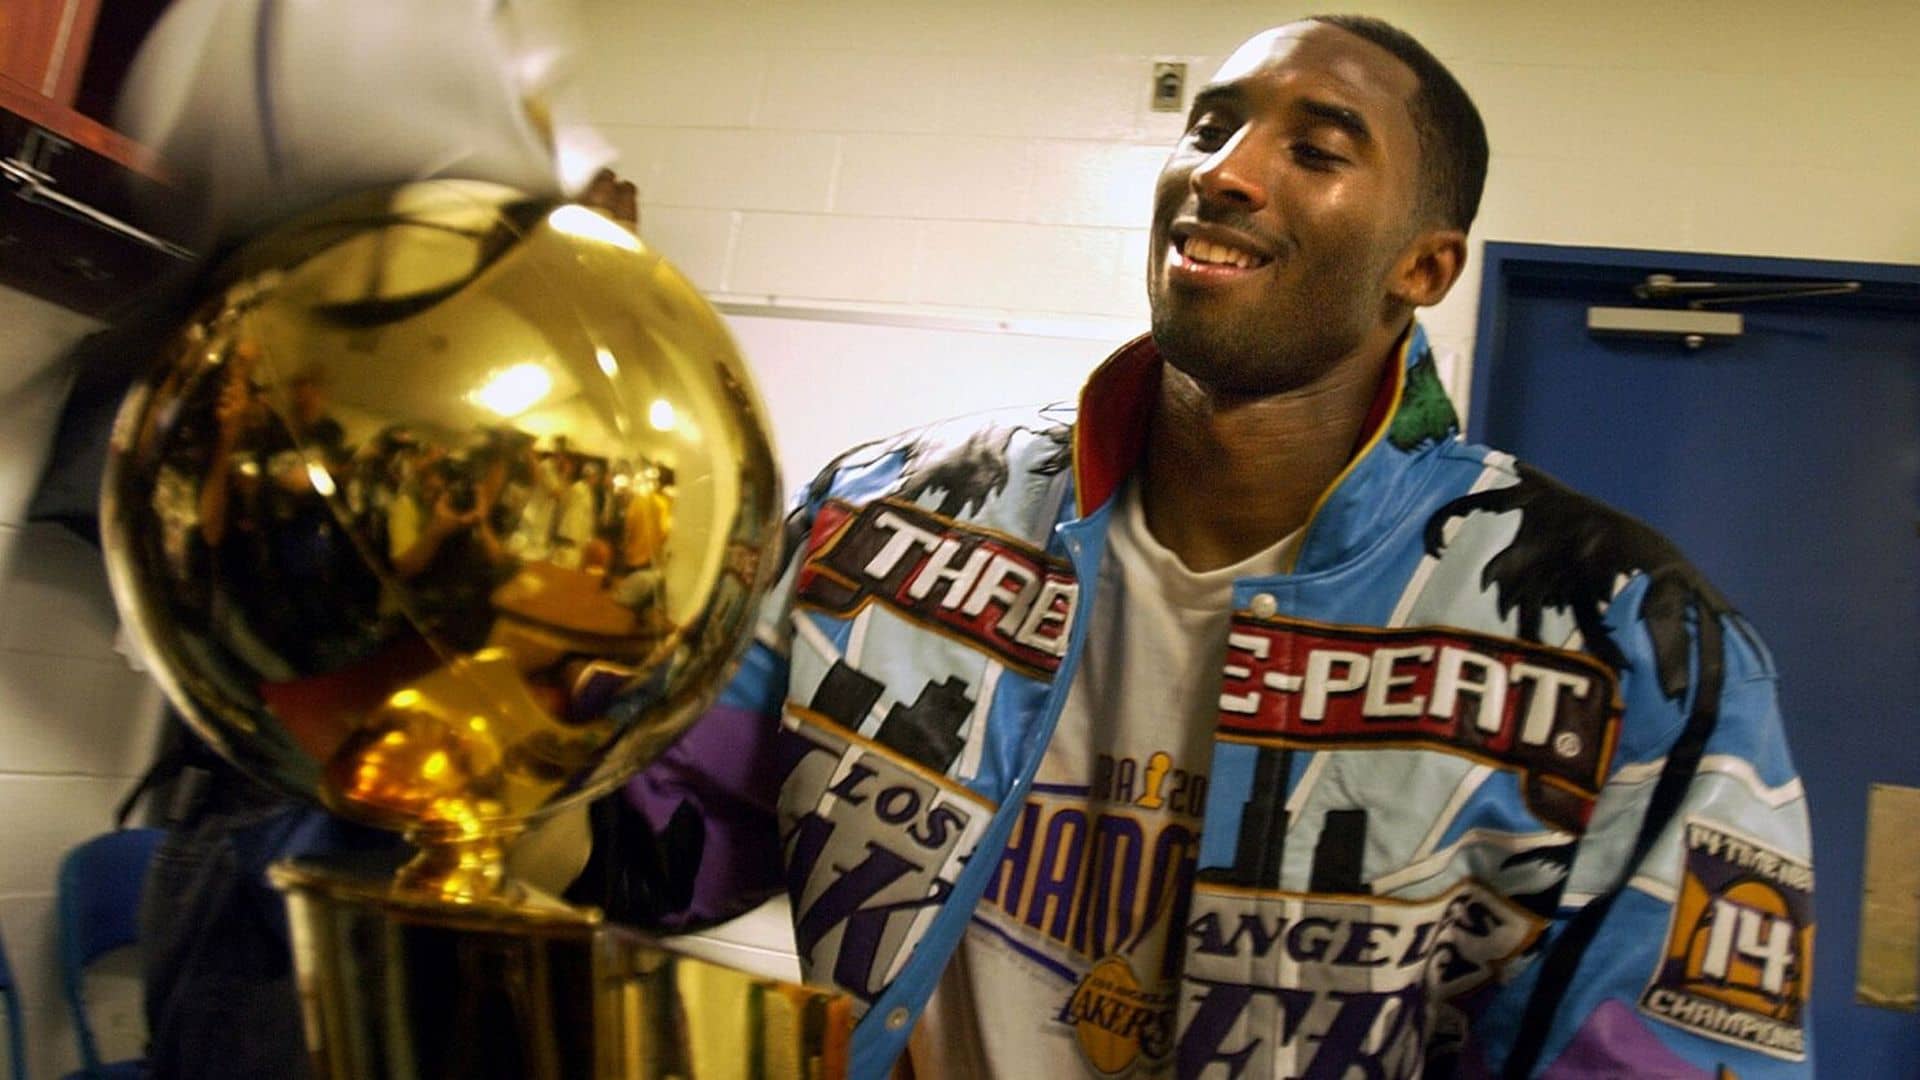 At the young age of 21 years and 301 days, Kobe Bryant became the youngest player to ever win an NBA championship when he won his first championship in 2000.